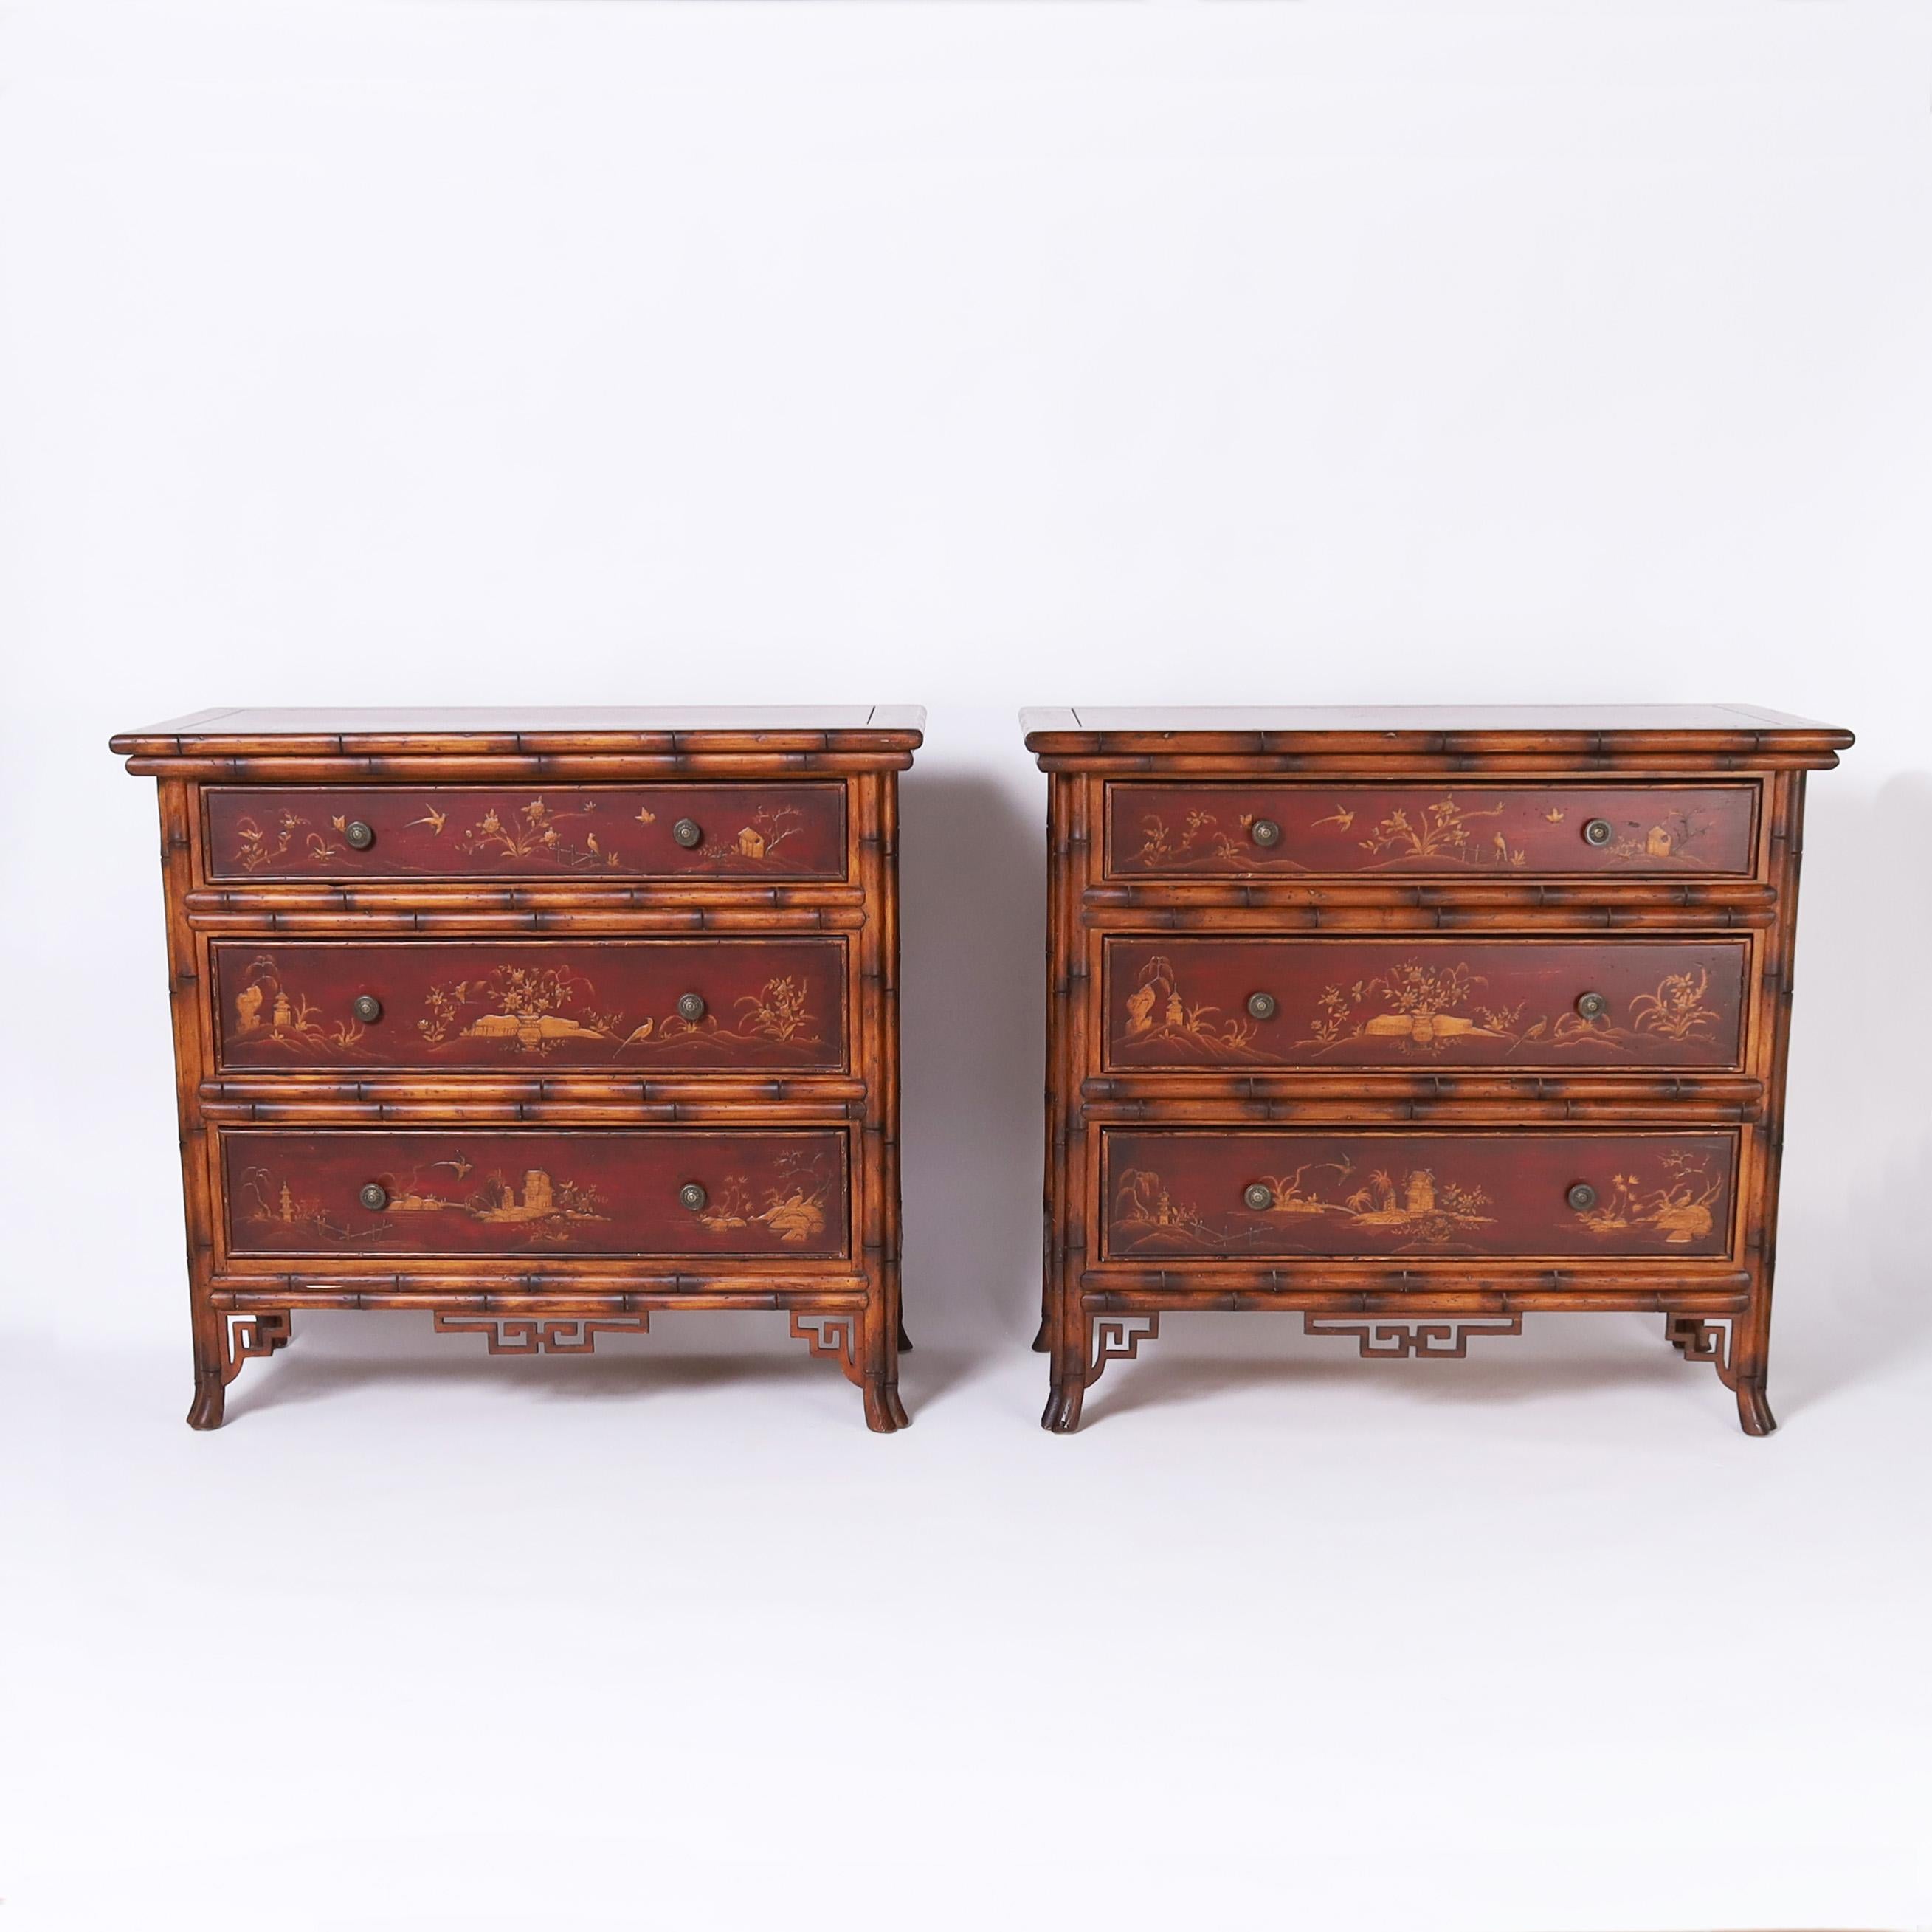 Impressive pair of mid century three drawer chests crafted with bamboo frames, featuring red lacquer panels decorated in Chinoiserie, brass hardware, Asian style brackets and splayed feet. Attributed to Maitland-Smith.